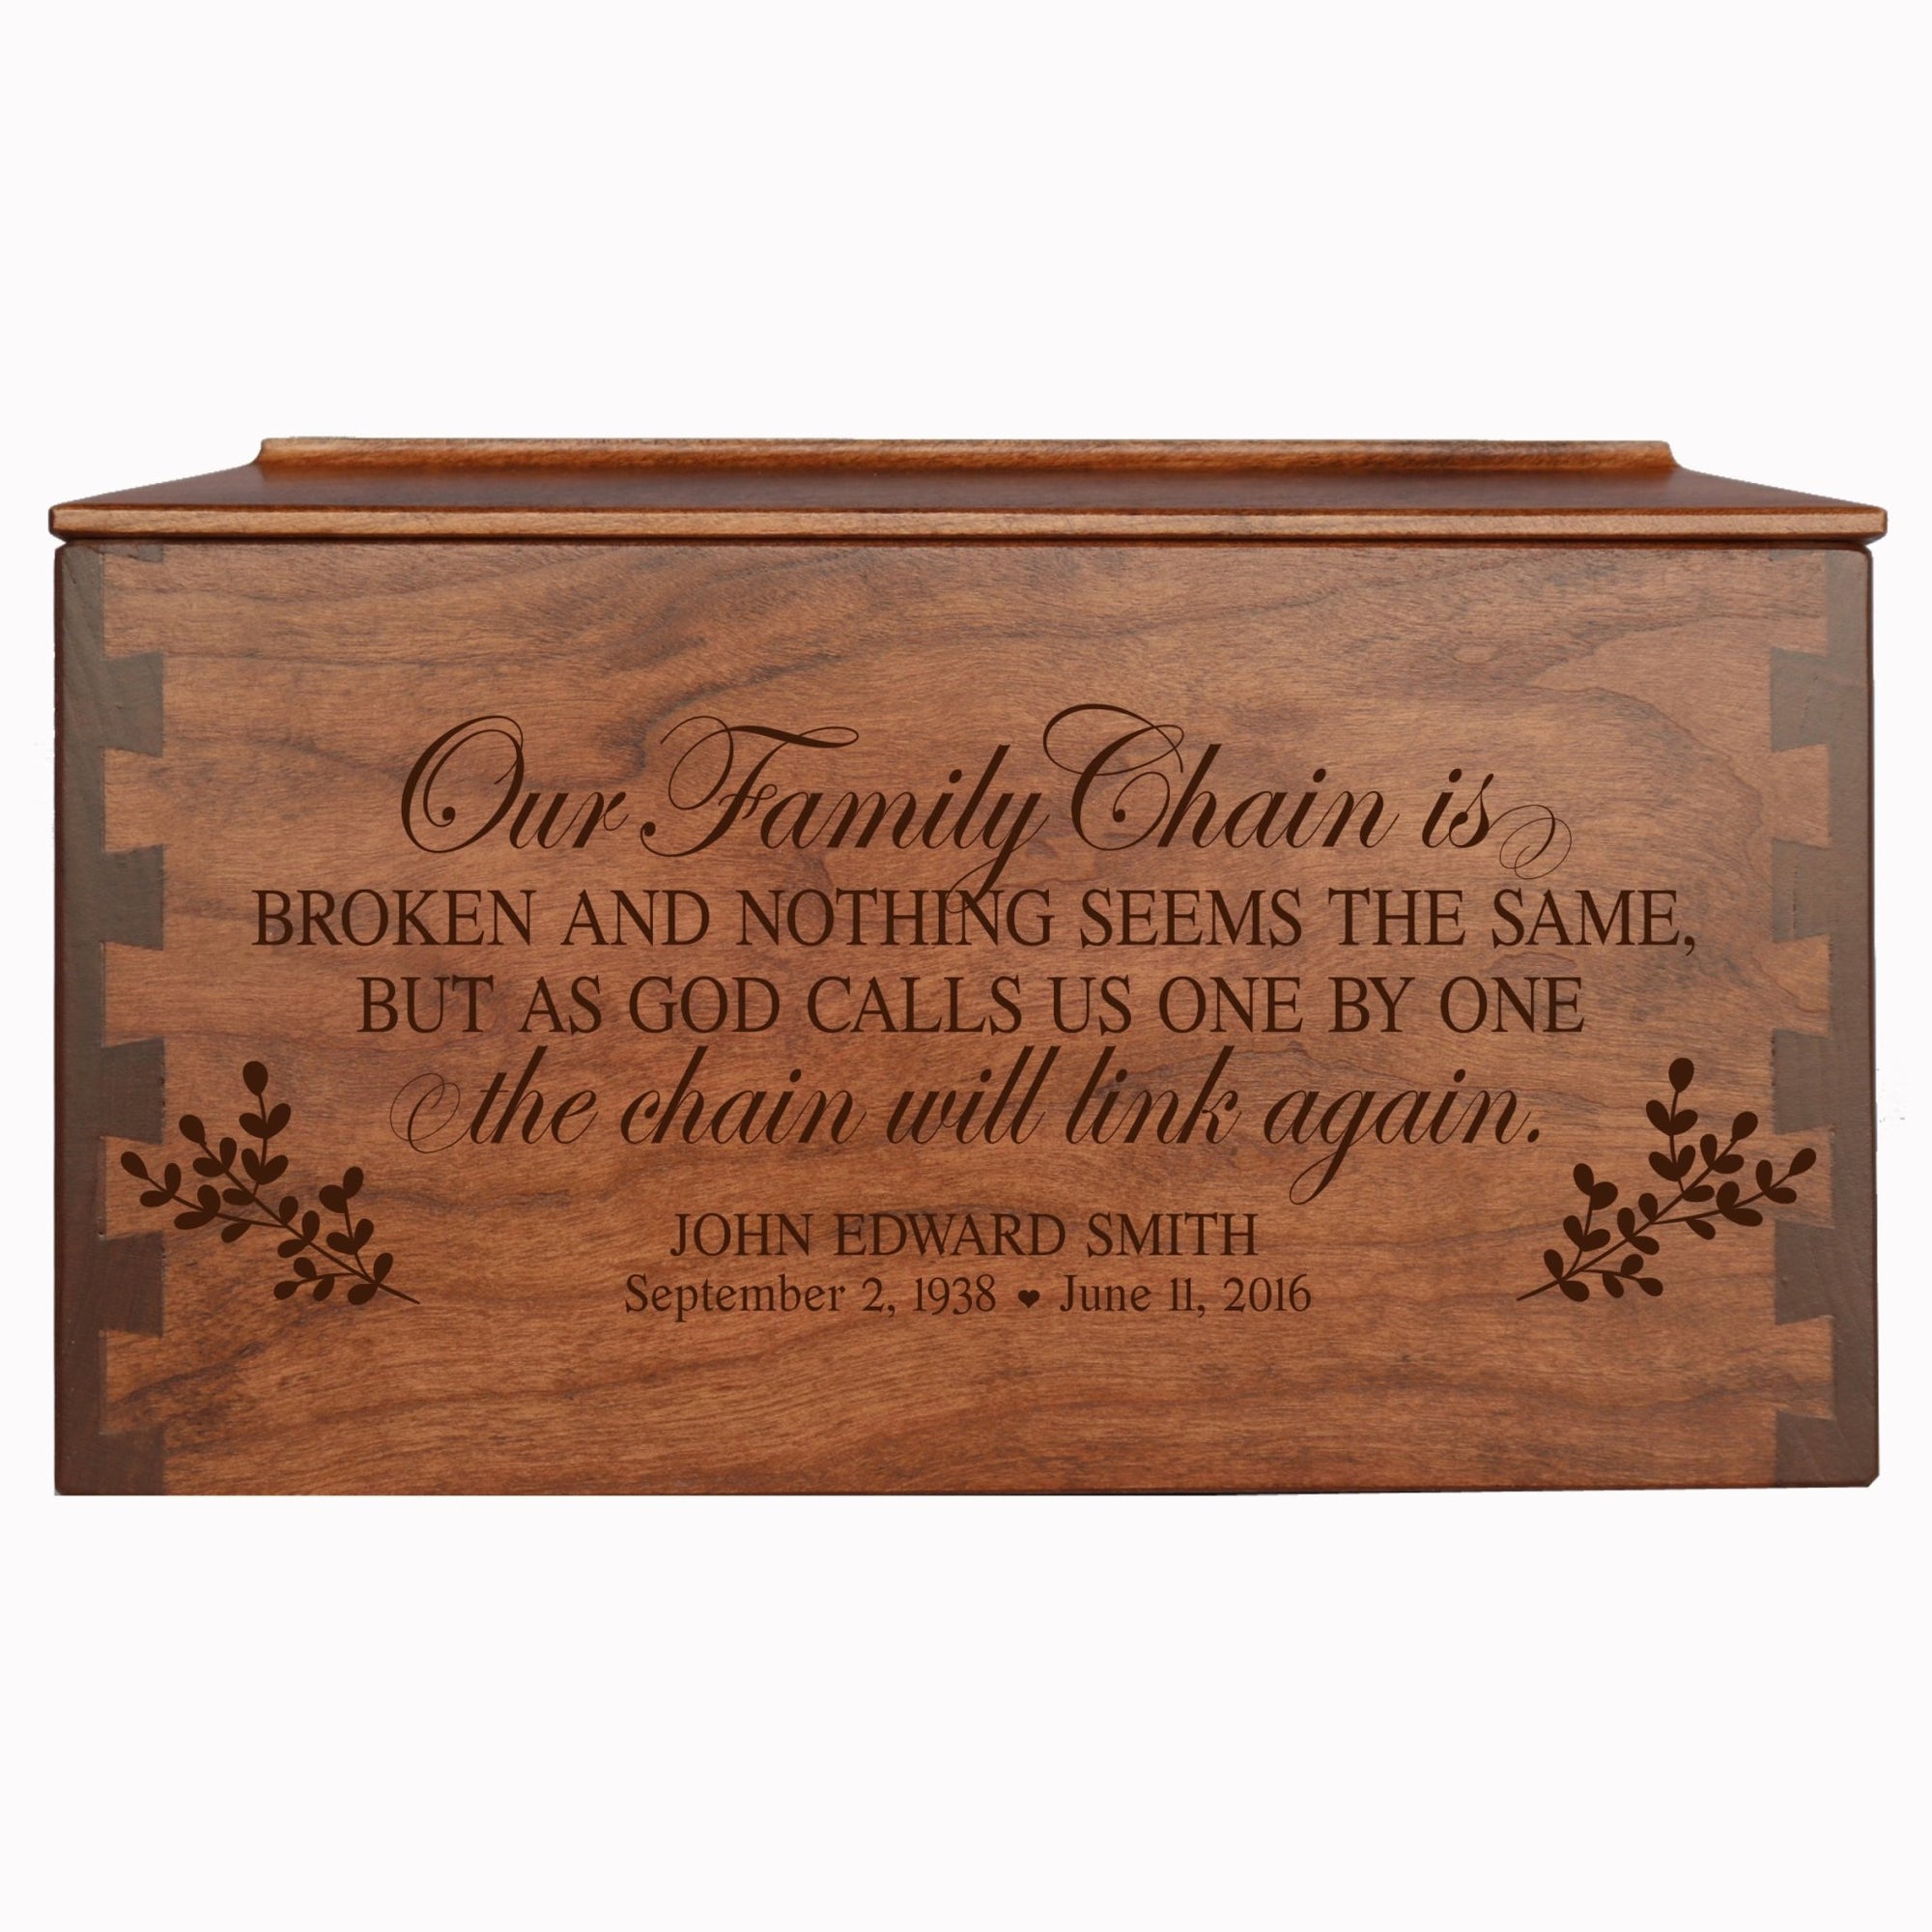 Custom Wooden Cremation Urn Box Large for Human Ashes holds 291 cu in Our Family Chain - LifeSong Milestones